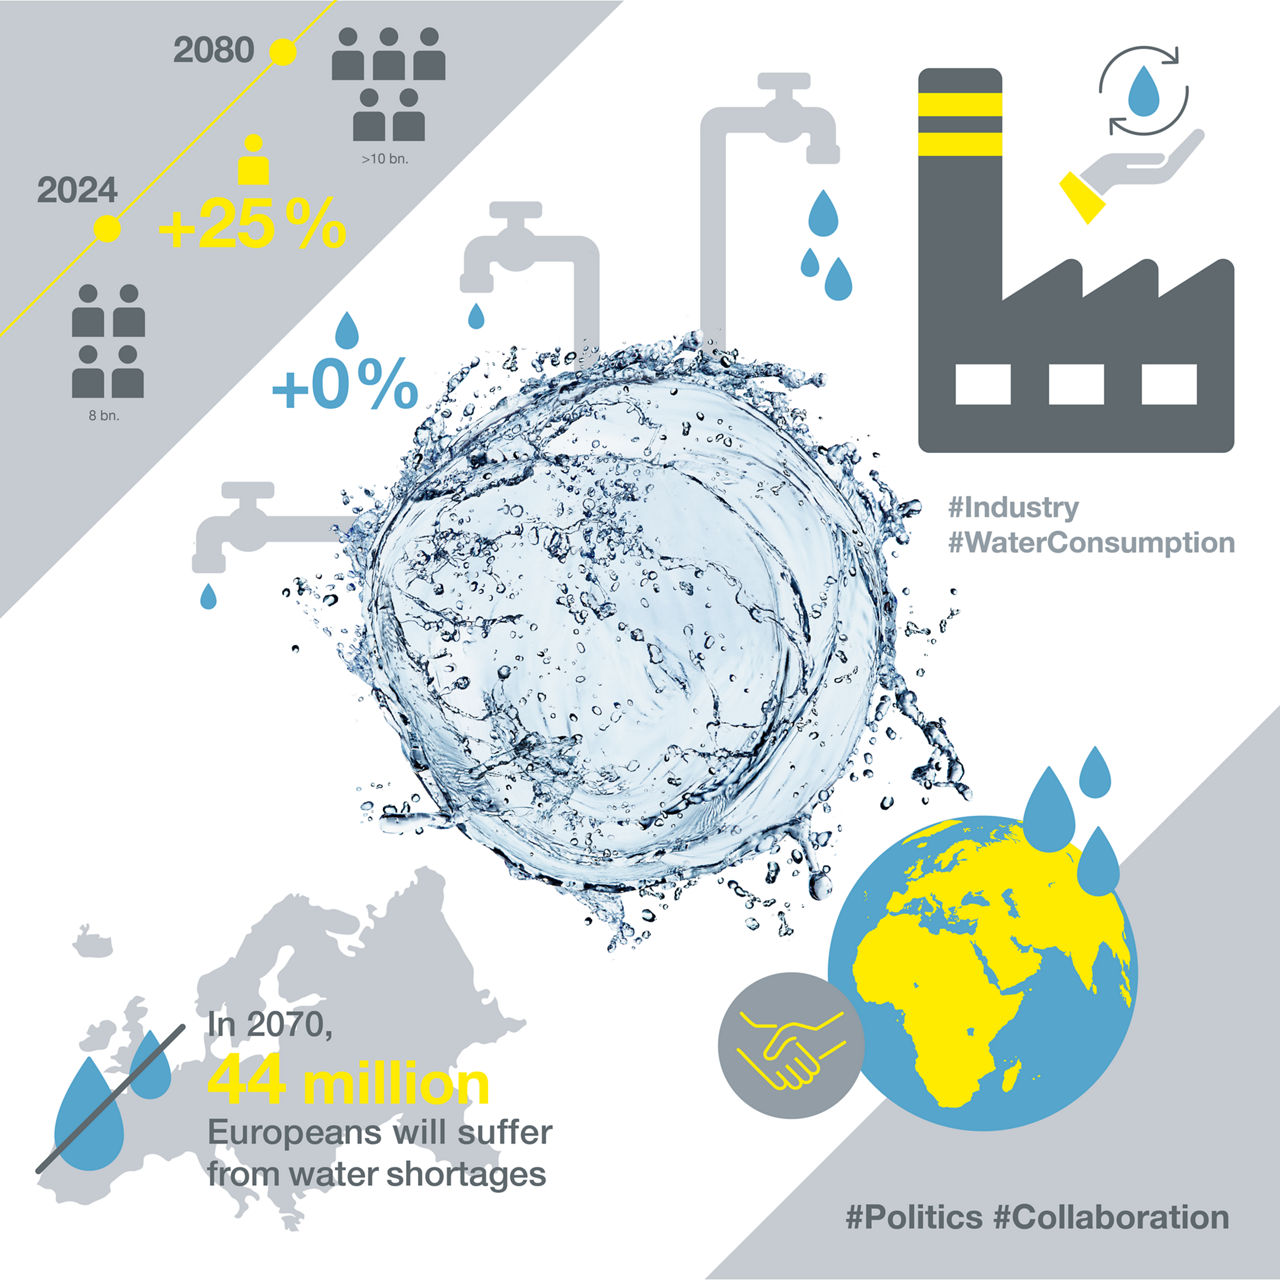 The infographic shows: The global water crisis is worsening. More and more people will suffer from water scarcity in the future. According to current estimates, 44 million people in Europe alone will be affected by 2070. Close international cooperation between government and business is essential and long overdue.